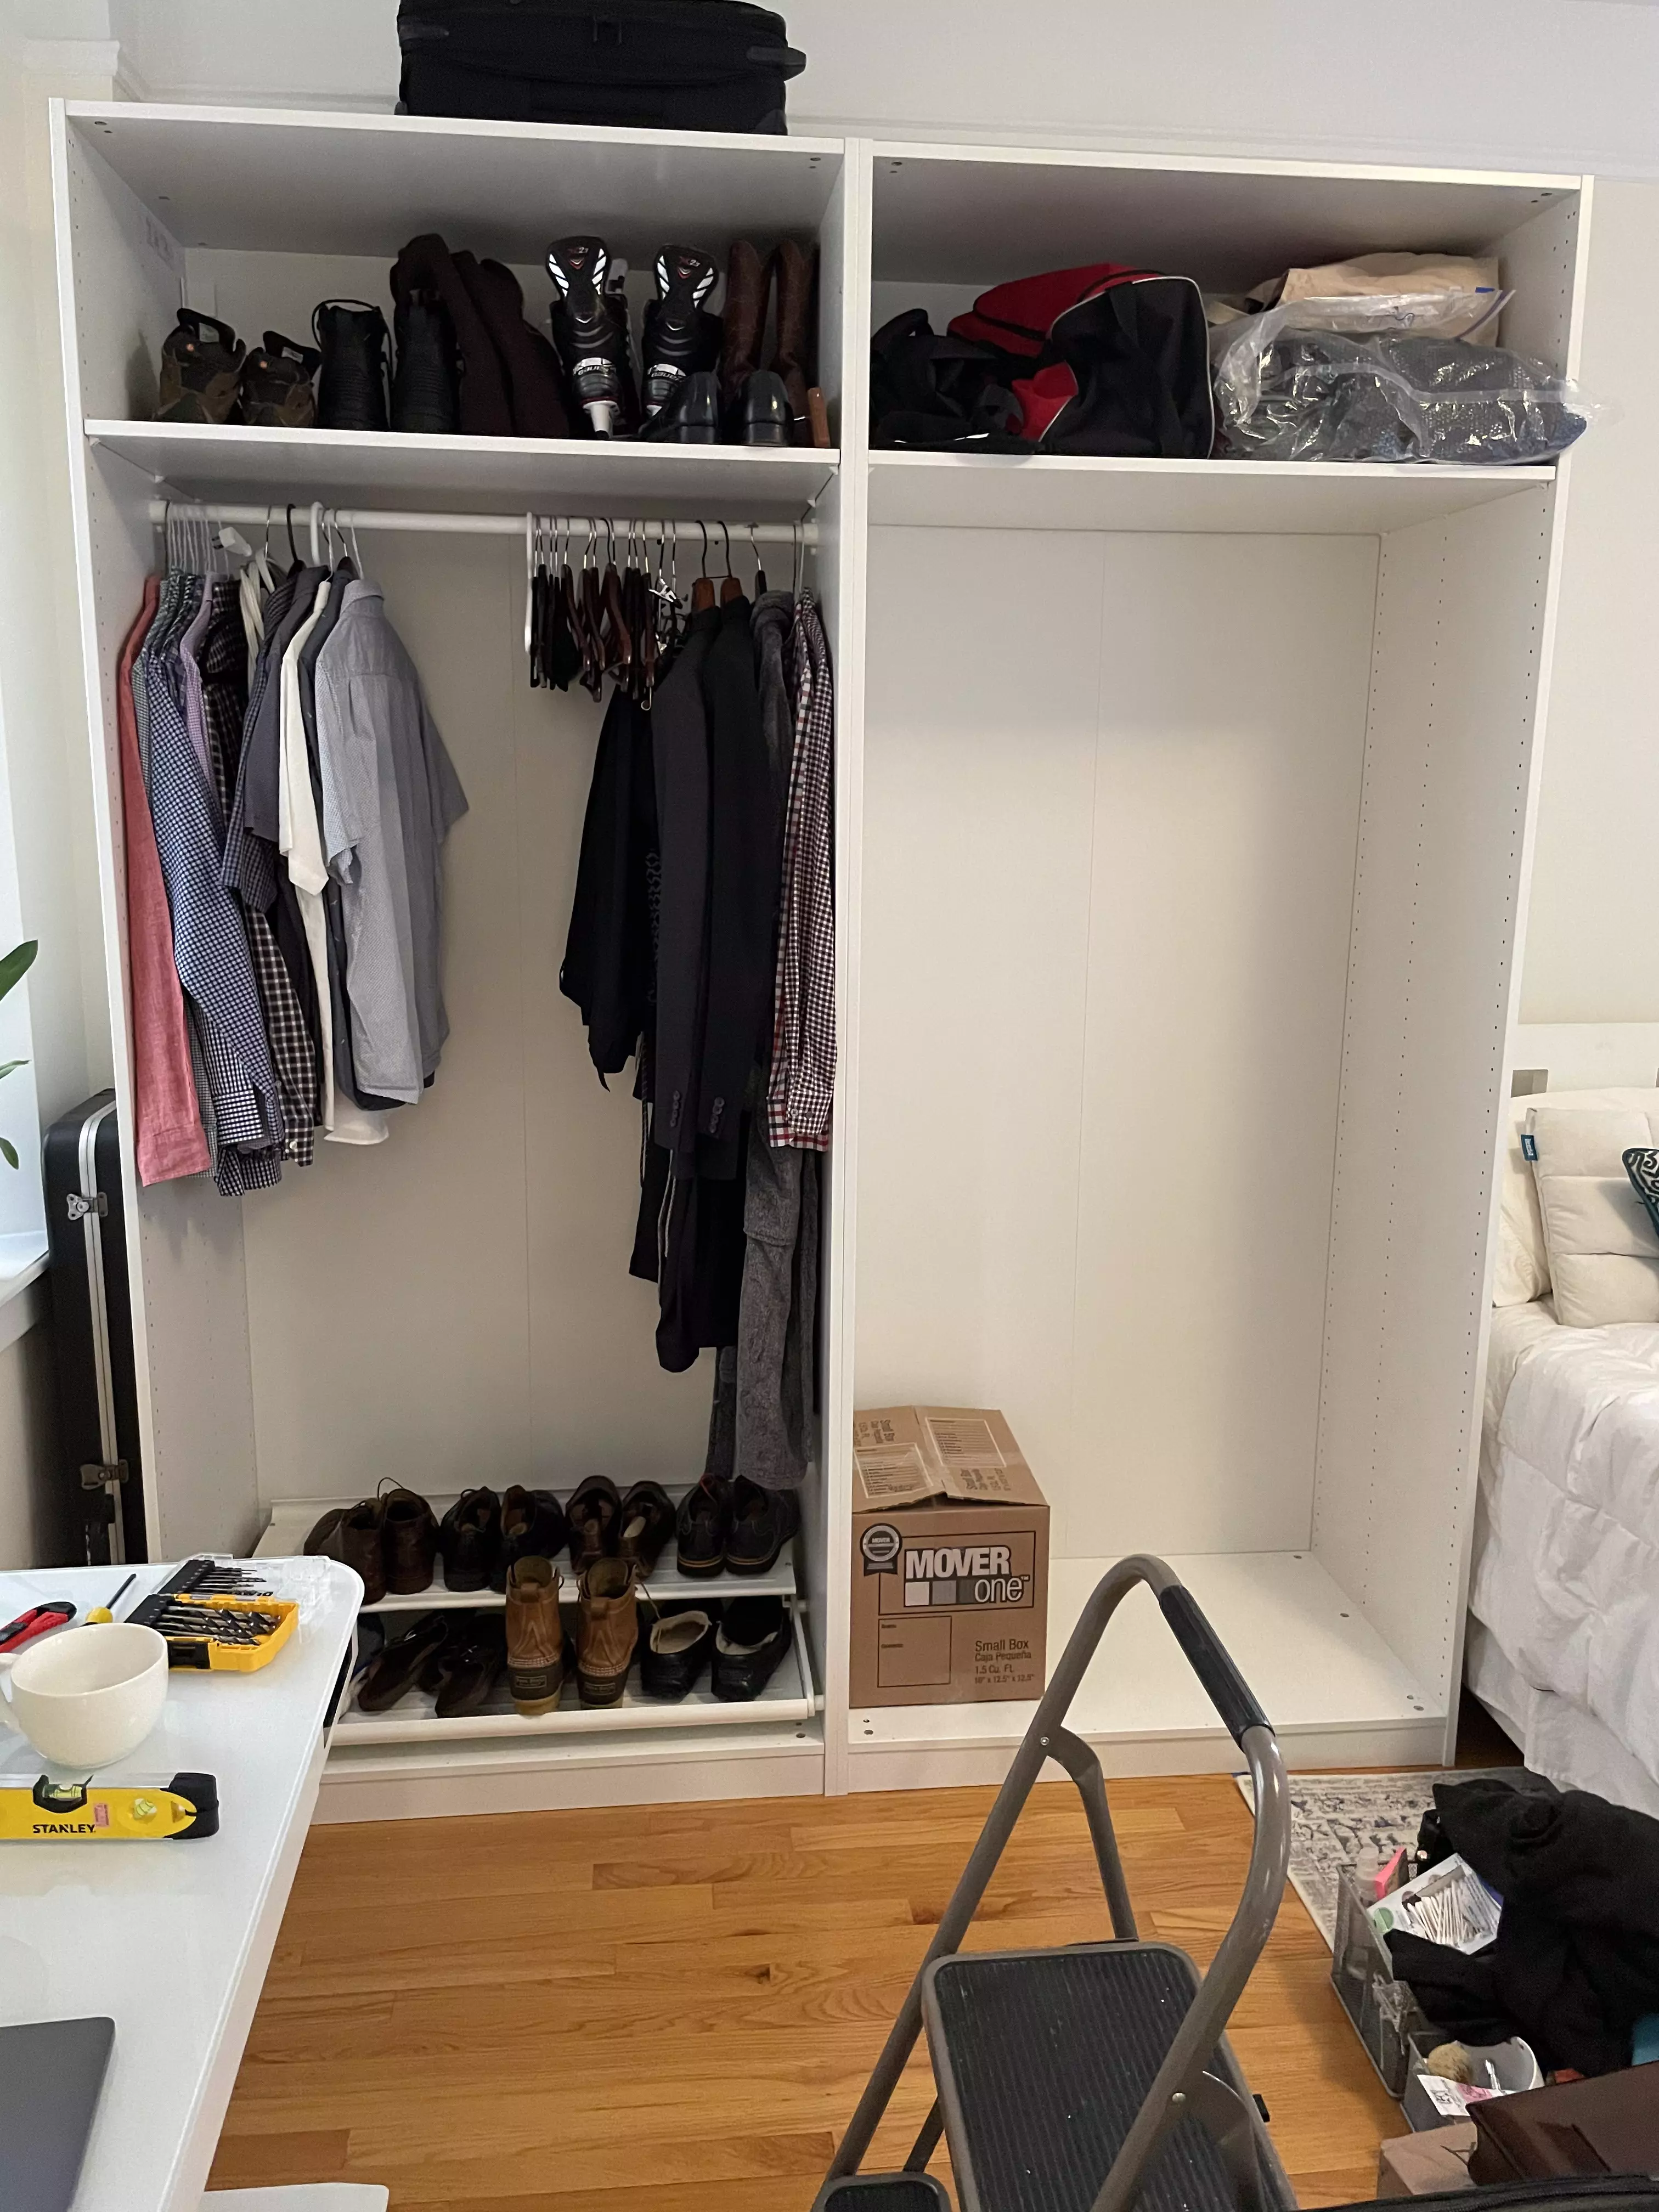 Put some of the accessories in: storage shelves, clothing rod, pull-out double-decker shoe tray. Aforementioned Stanley level and DeWalt drill bit set and coffee mug were also vital to this effort.